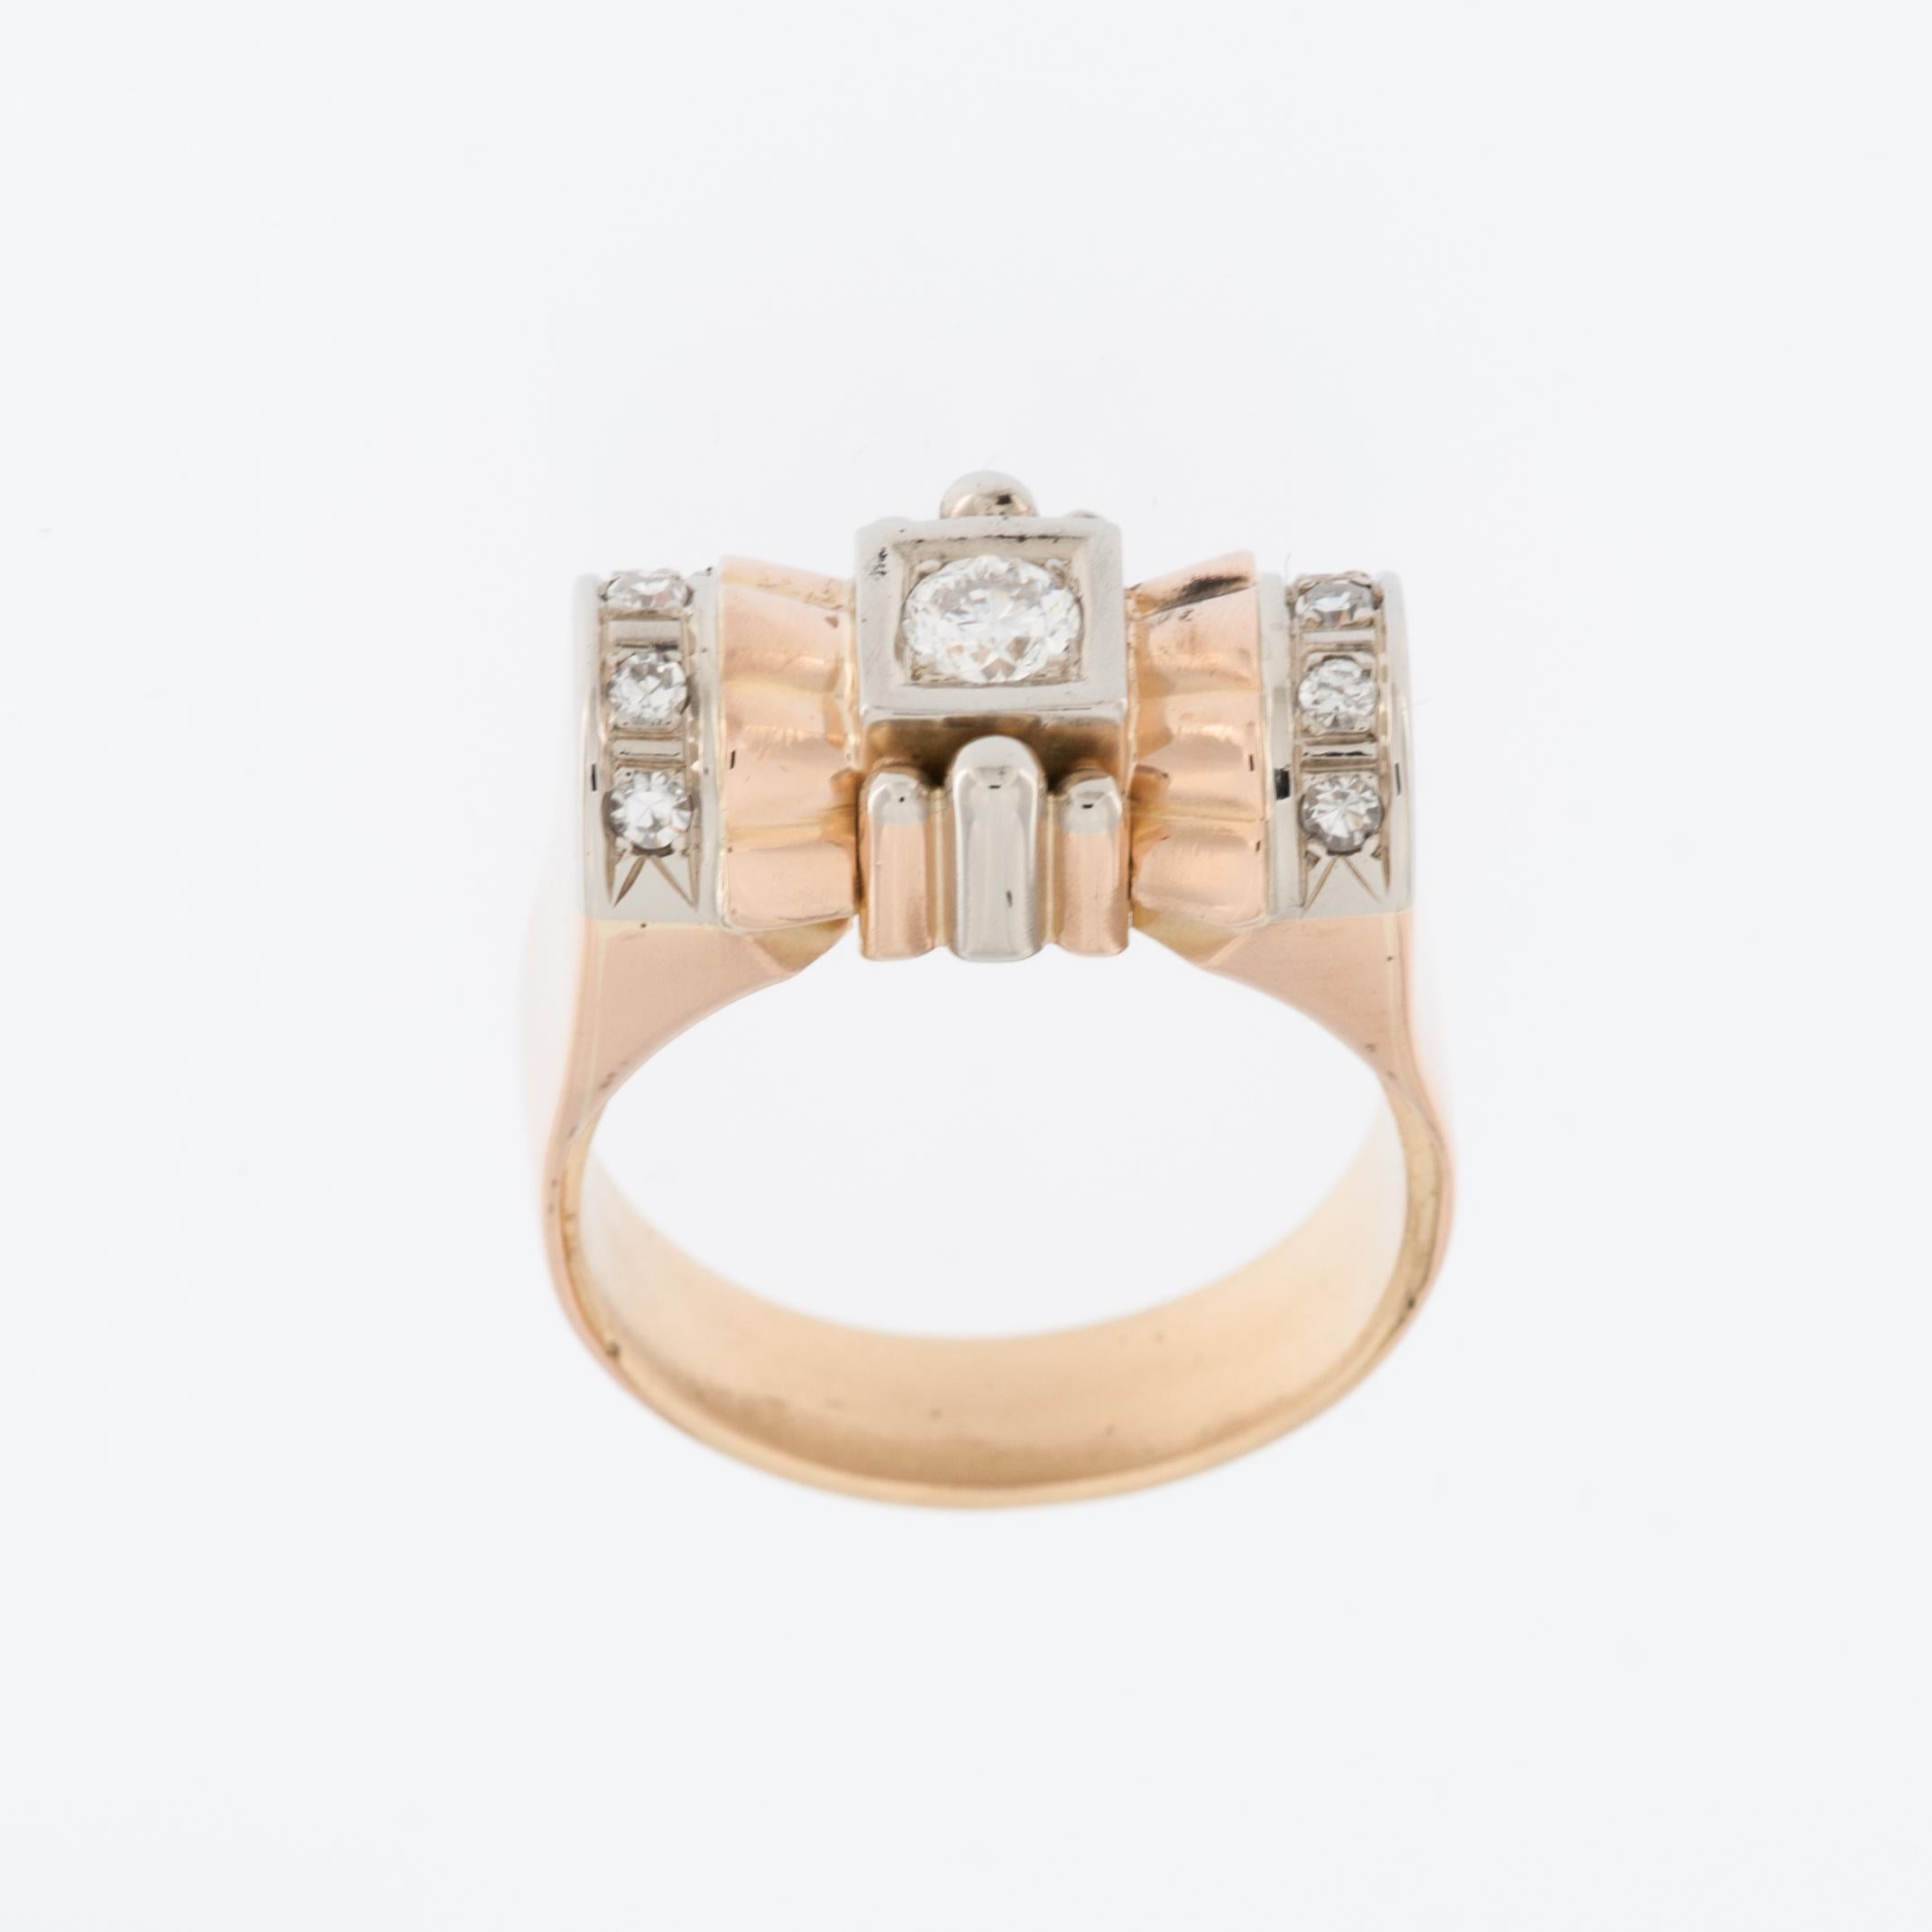 The Art Deco 18kt Yellow and White Gold Hand-Chiselled Ring is an exquisite piece of jewelry. 
With its combination of yellow and white gold, it exhibits a captivating contrast. The hand-chiselled details add a touch of craftsmanship and uniqueness